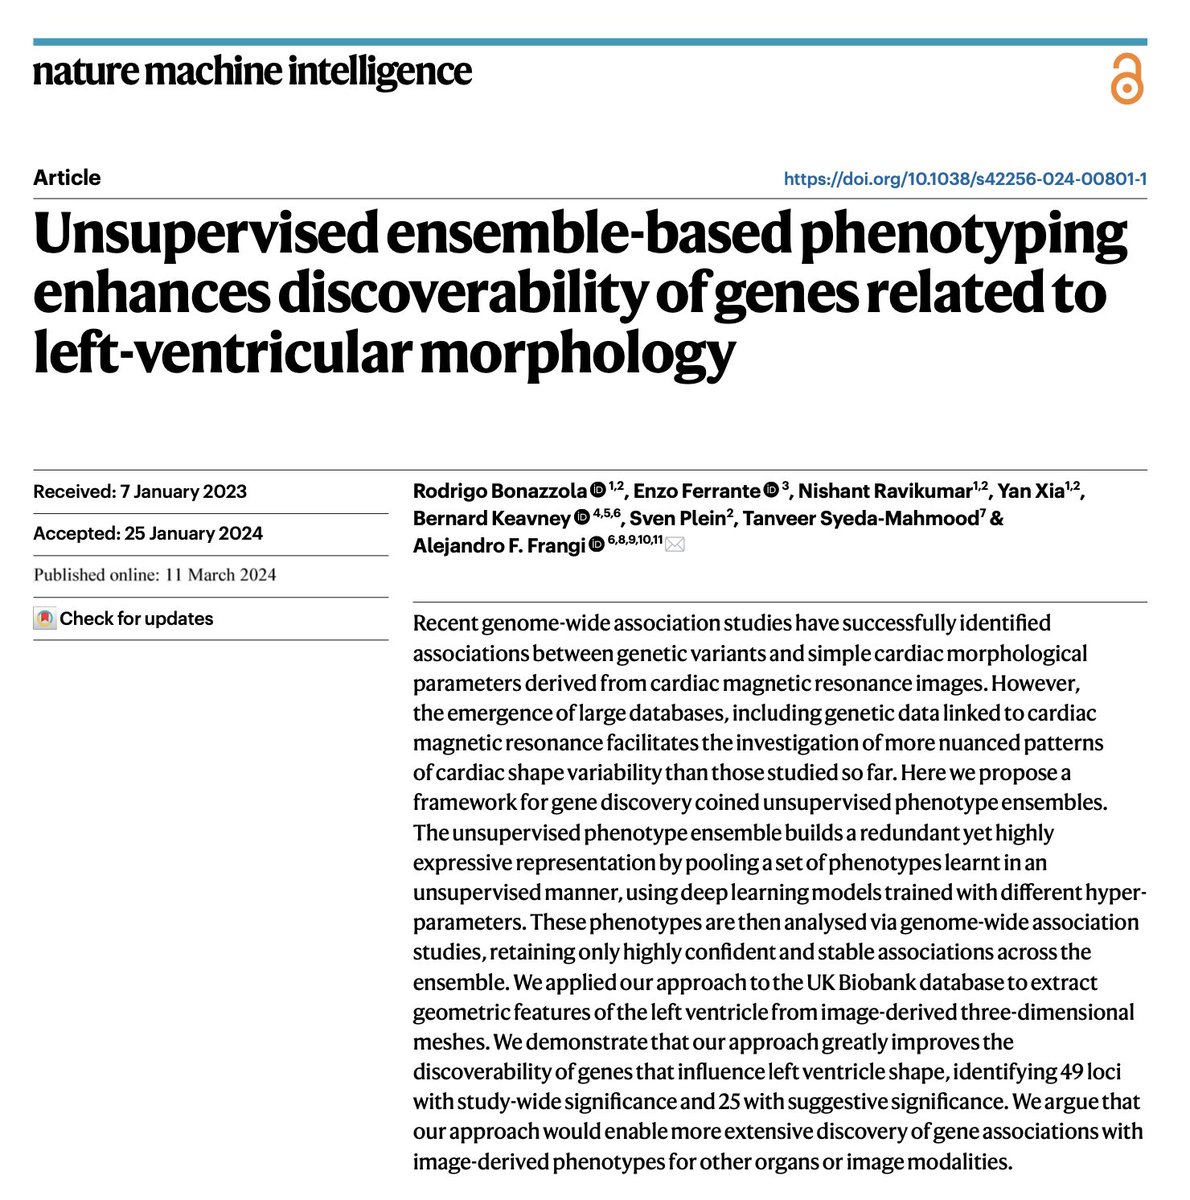 New paper just published in Nature Machine Intelligence @NatMachIntell! We propose a framework to discover genotype-phenotype associations for left ventricular morphology using representations learned from🫀meshes Congrats @rodbonazzola @affrangi ! 📑-> nature.com/articles/s4225…